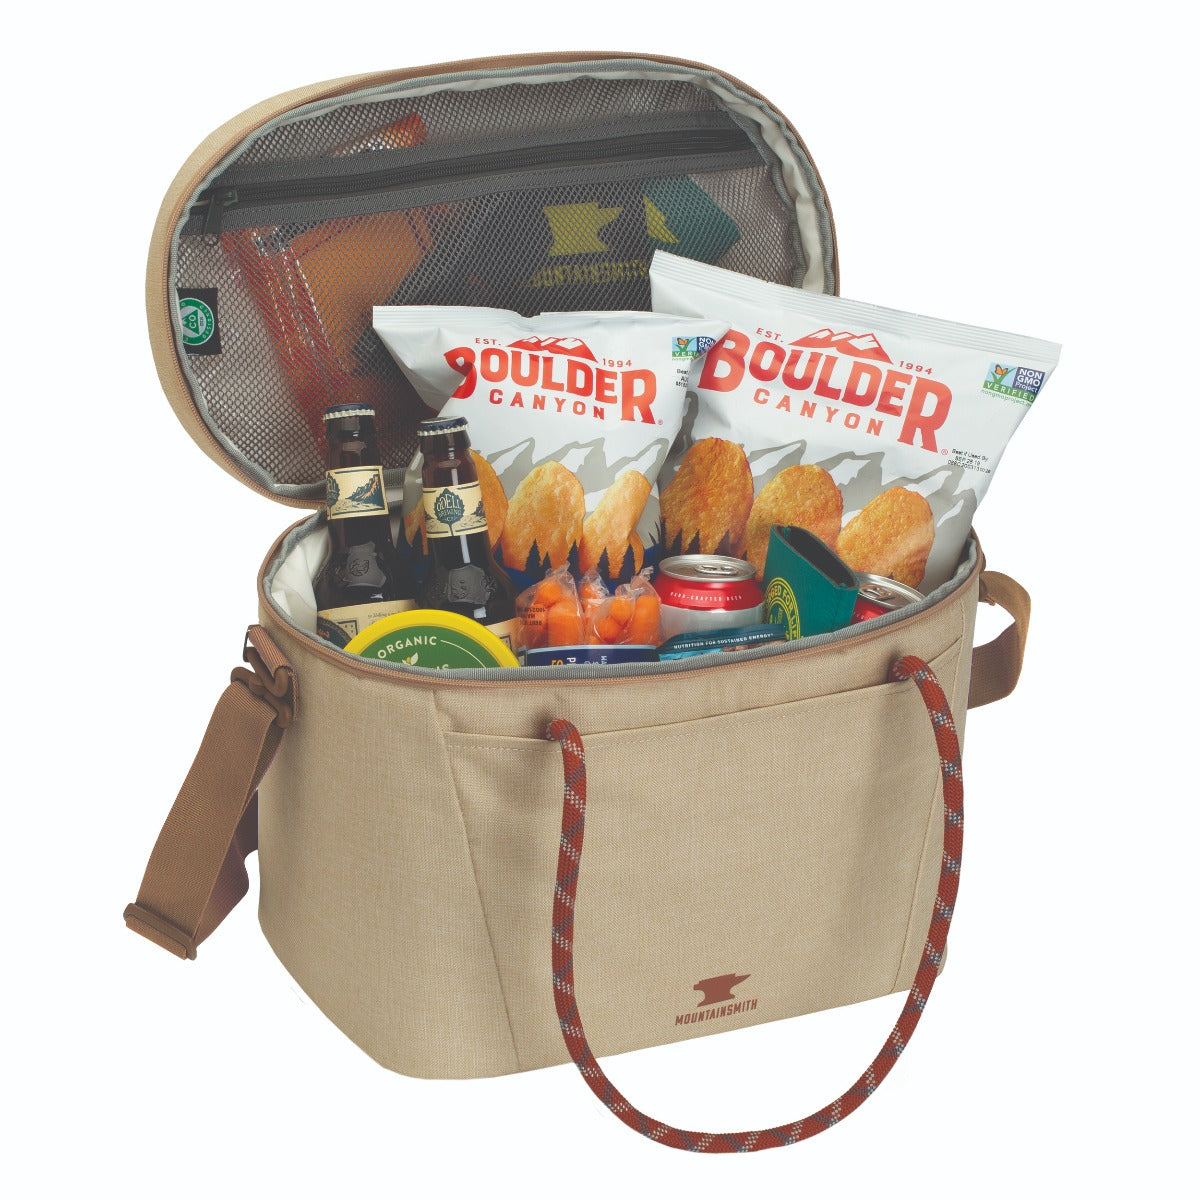 2020 Takeout Soft-Sided Cooler - Mountainsmith